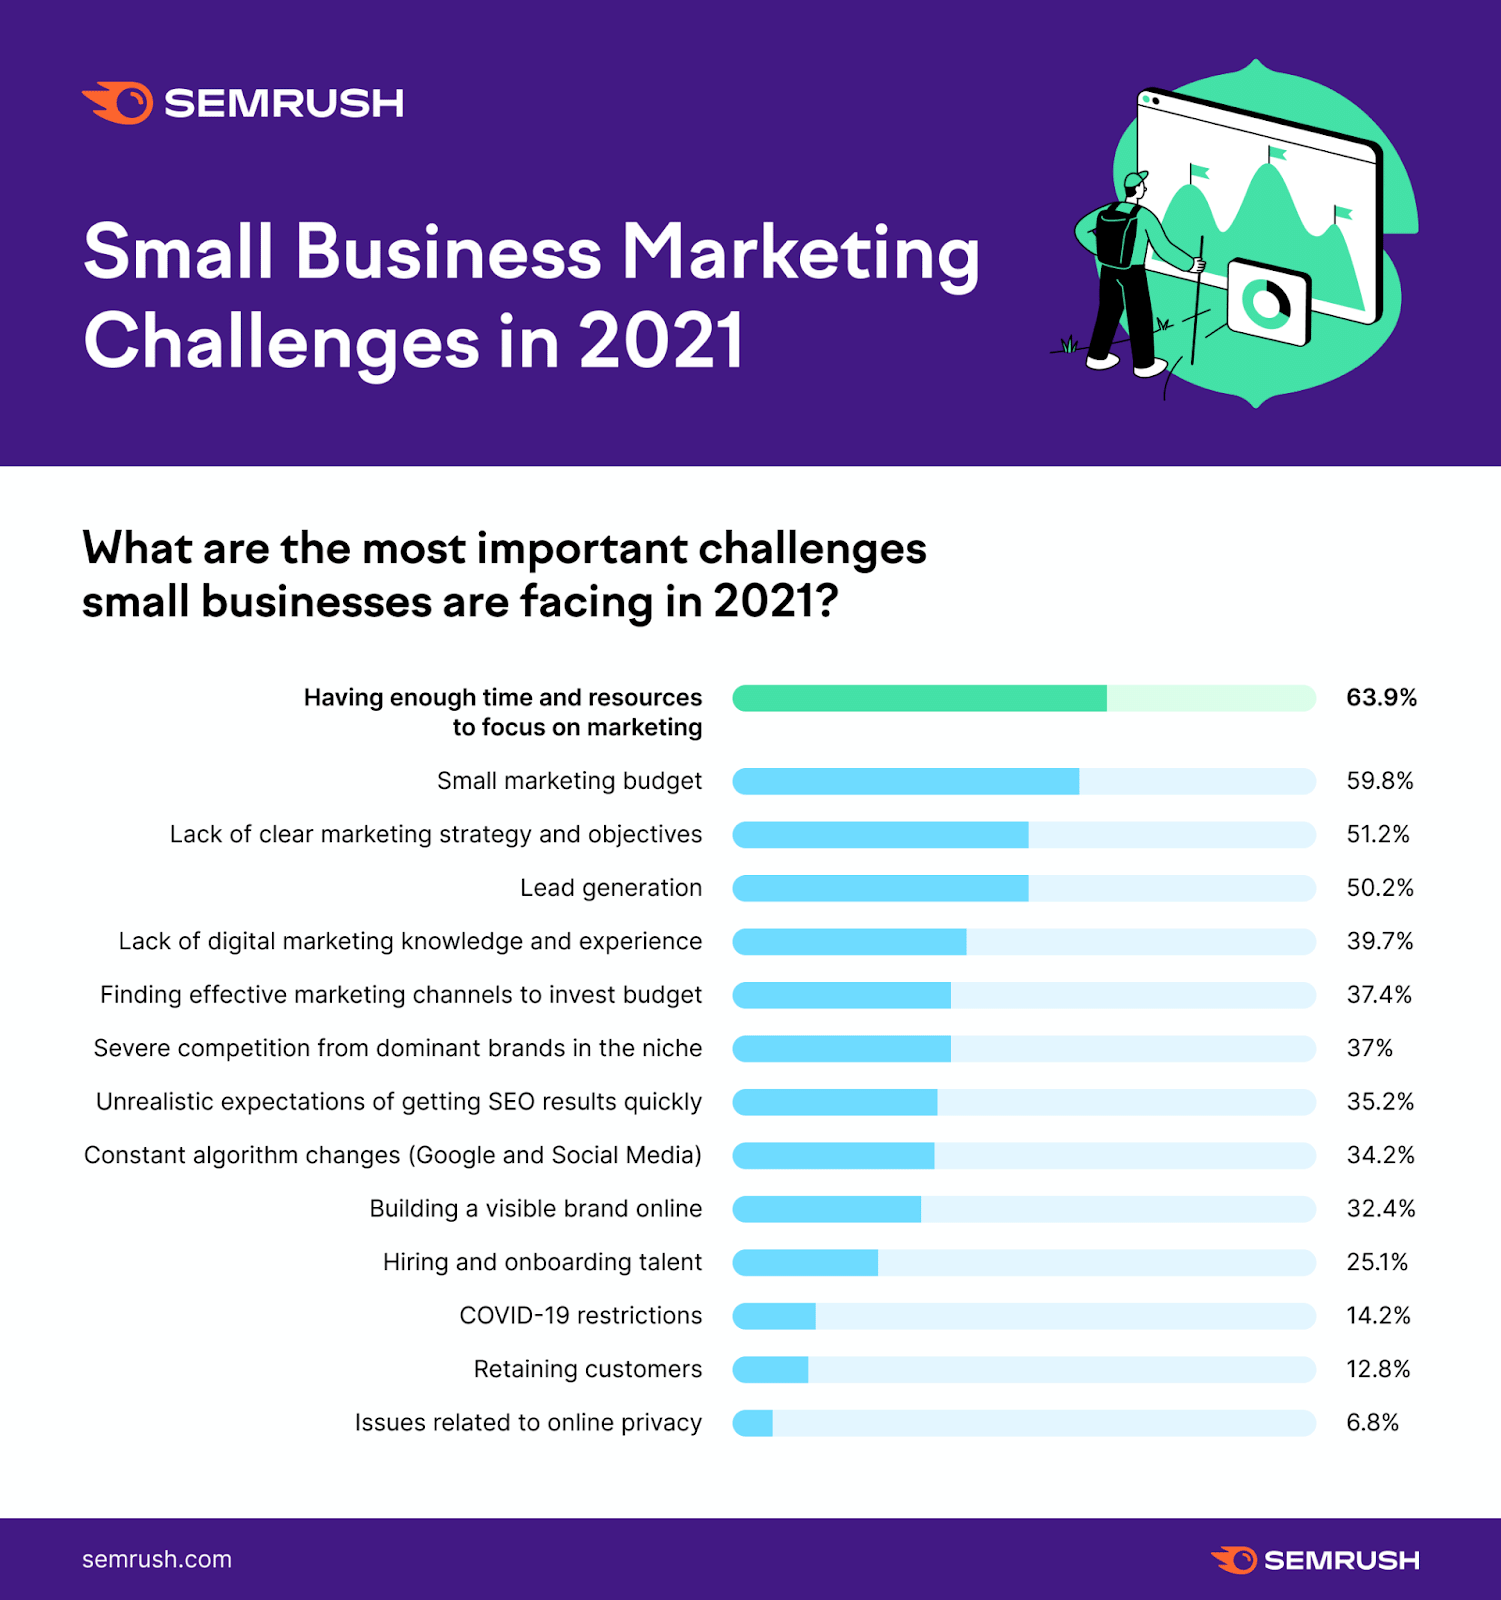 infographic showing "small business marketing challenges in 2021" by Semrush